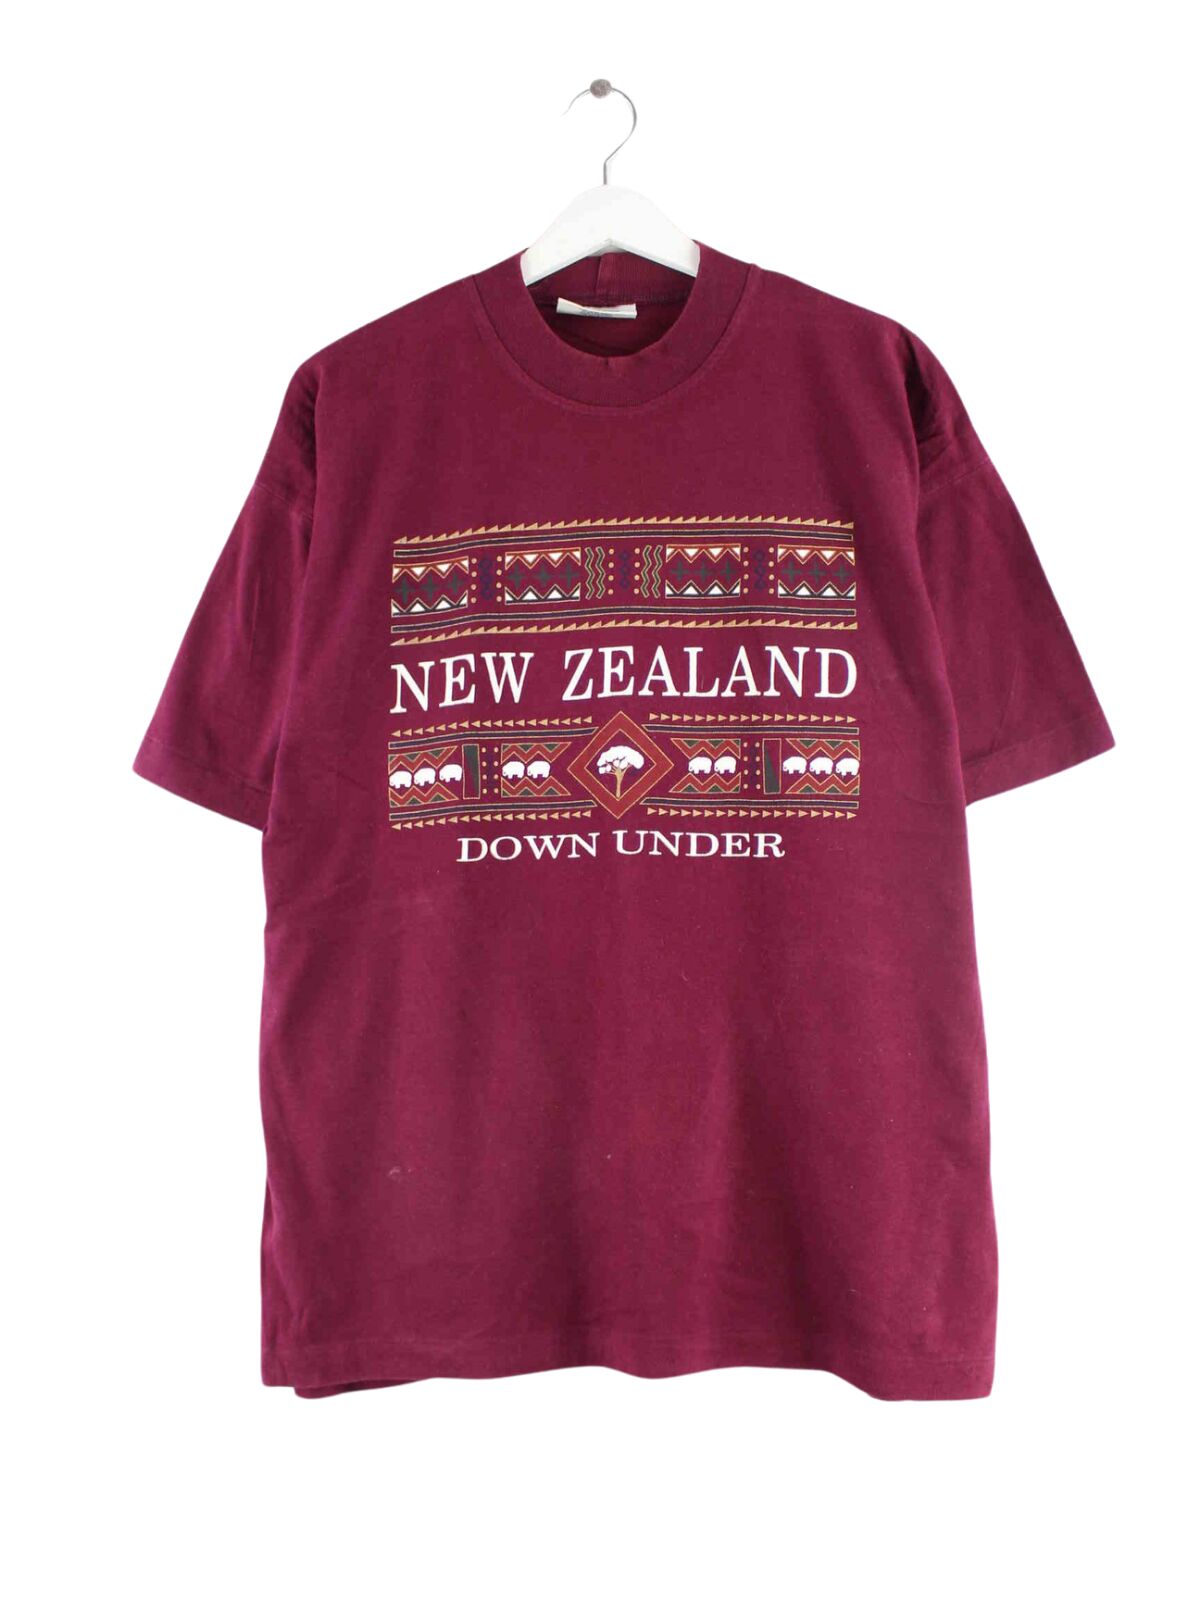 Vintage 90s New Zealand Print Single Stitched T-Shirt Rot M (front image)